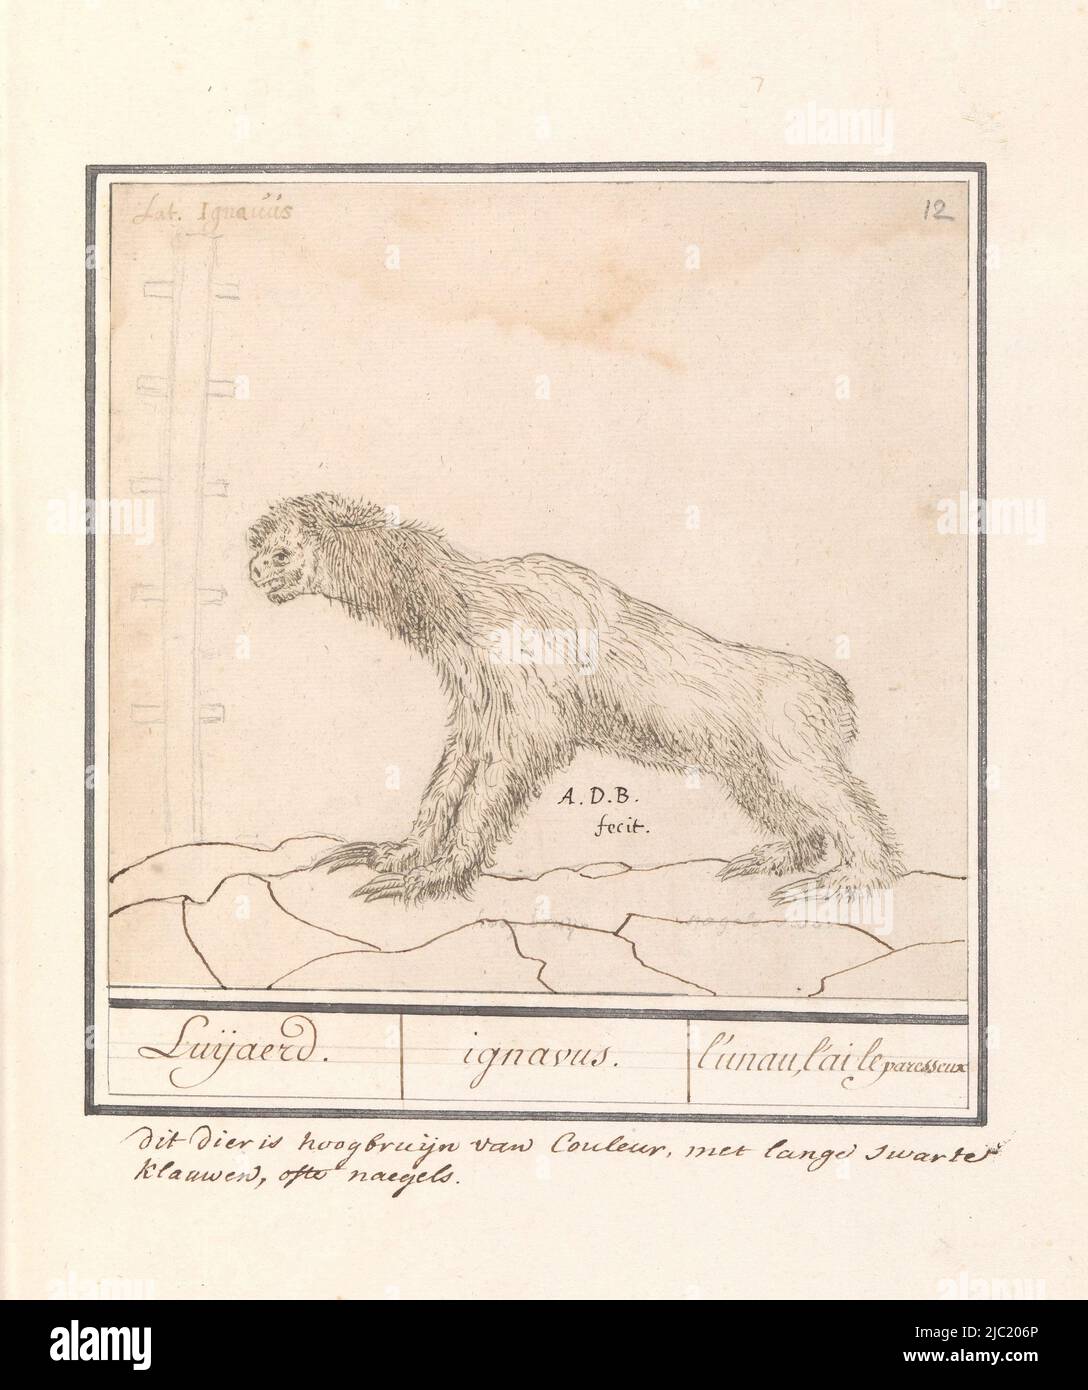 Three-fingered sloth. Numbered upper right: 12. With the name in Latin. Two-line annotation in Dutch added to the sheet. Part of the second album with drawings of quadrupeds. Second of twelve albums with drawings of animals, birds and plants known around 1600, commissioned by emperor Rudolf II. With explanation in Dutch, Latin and French, Three-fingered Sloth (Bradypus) Luijaerd. / ignavus. / l'unau, l'ai le paresseux, draughtsman: Anselmus Boëtius de Boodt, (mentioned on object), Praag, 1596 - 1605, paper, brush, pen, h 175 mm × w 183 mm Stock Photo